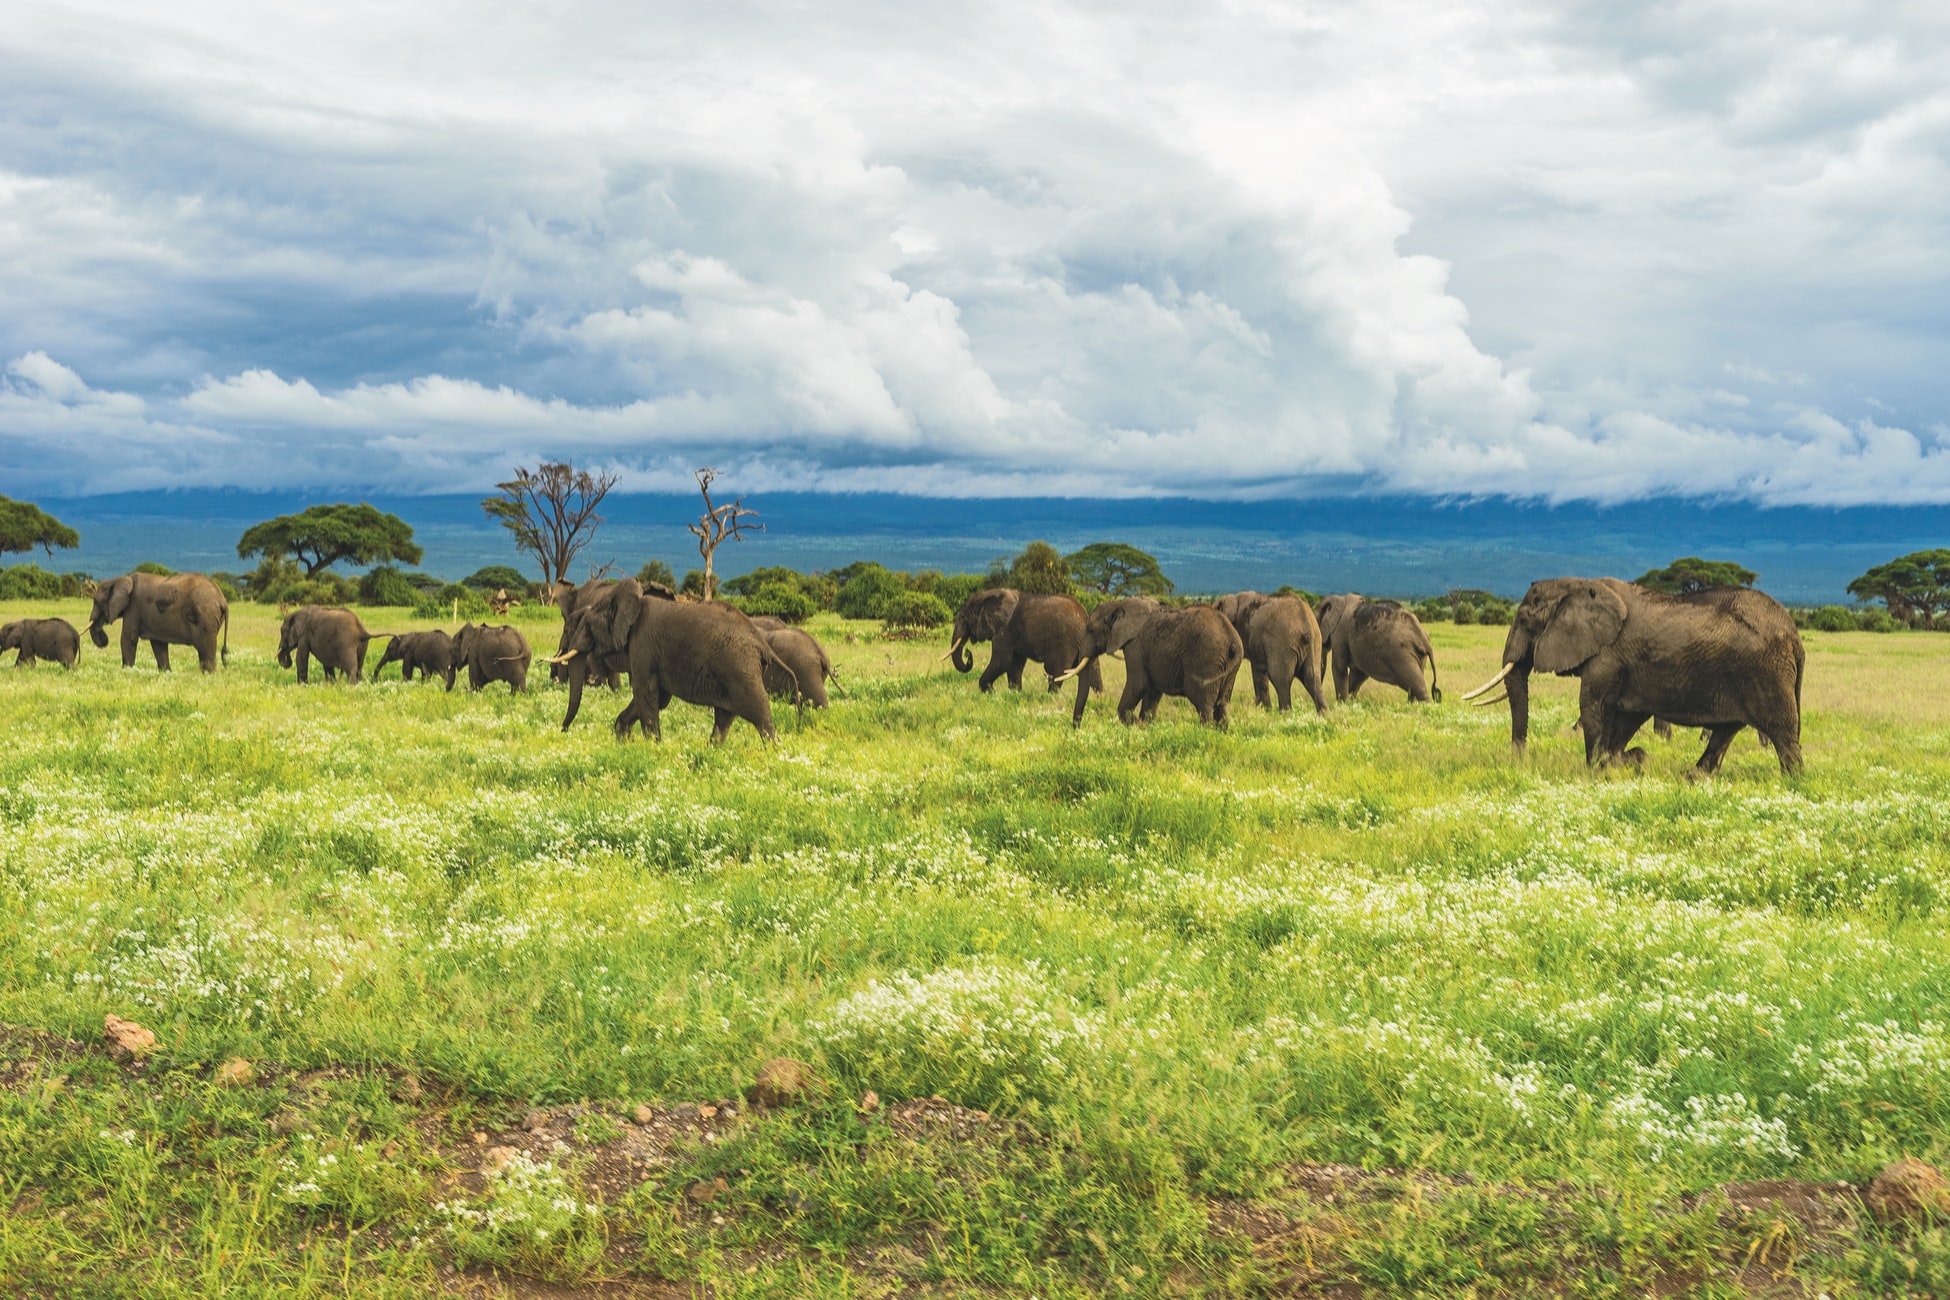 Elephants are intelligent and they move across national borders to where they are safer. If there’s been a clampdown on poaching in Tanzania, it may be that some have moved in, raising population numbers.